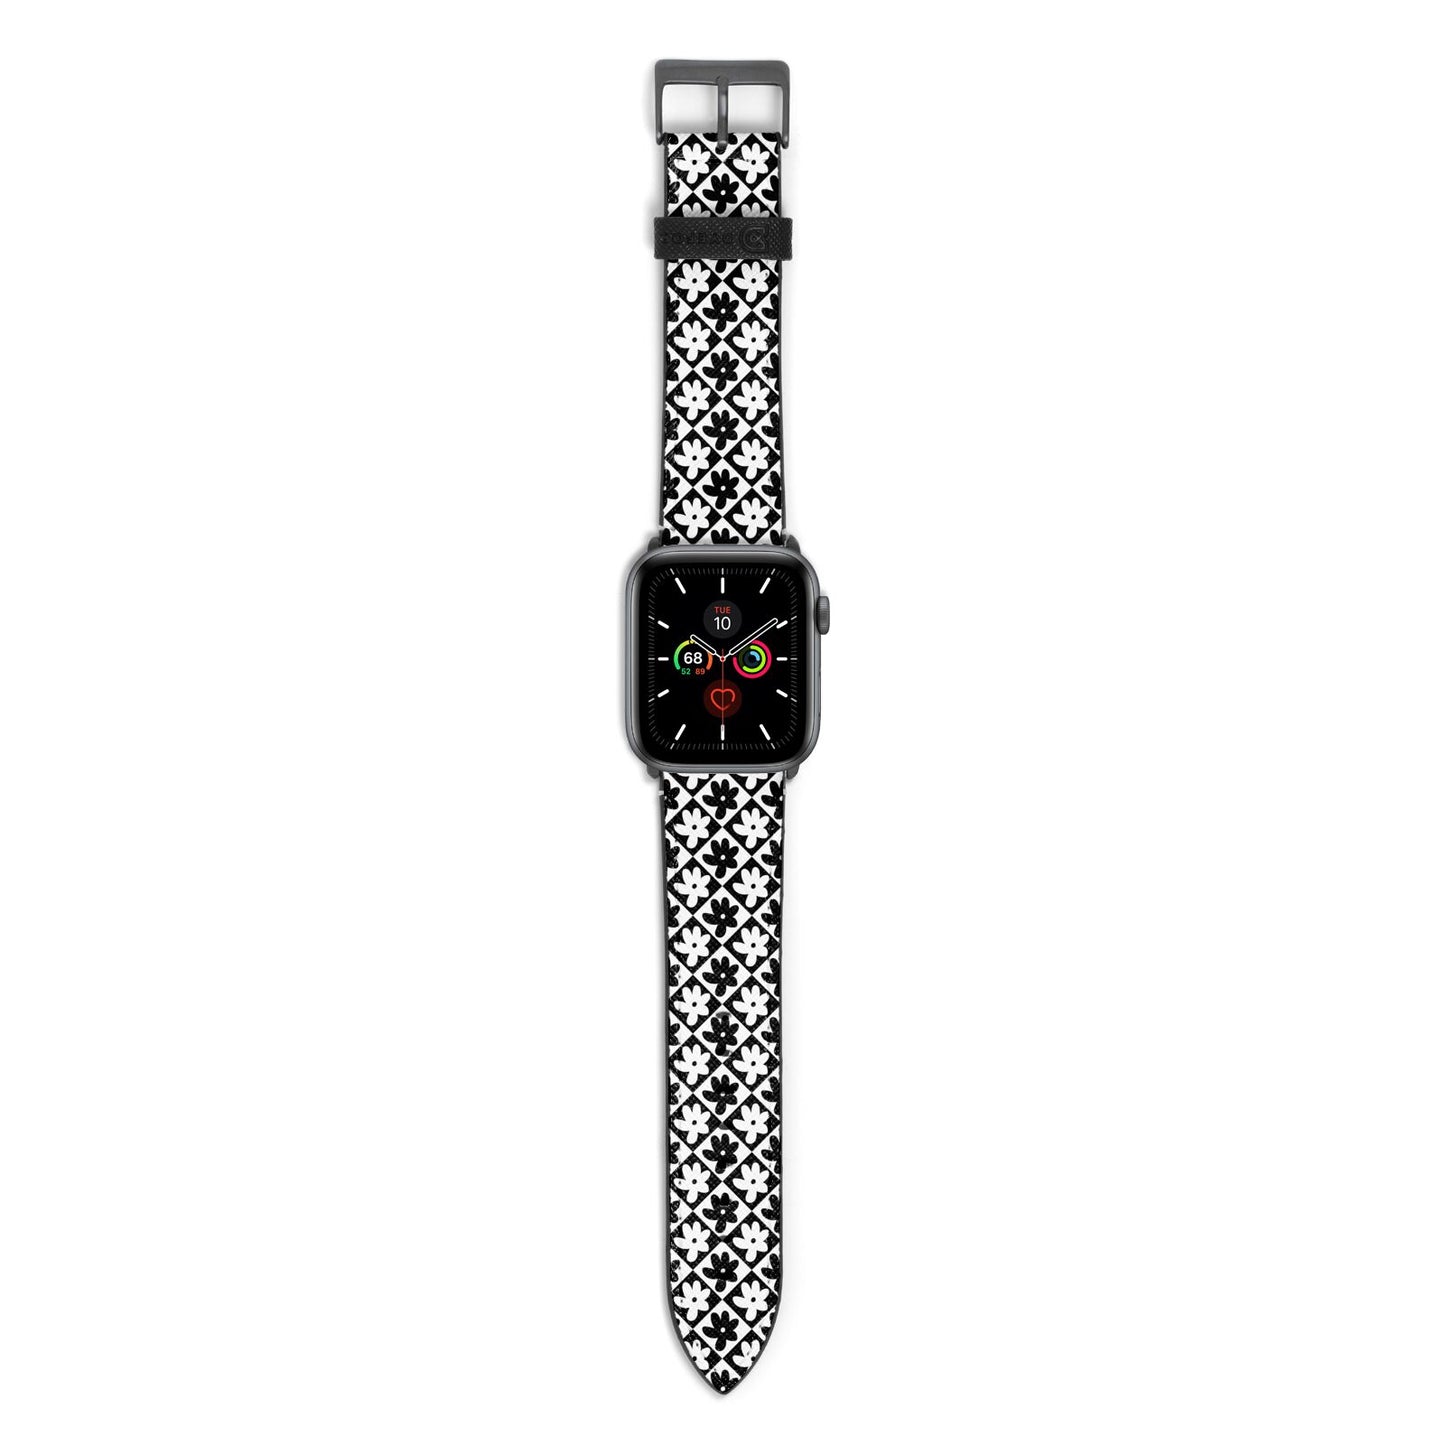 Check Flower Apple Watch Strap with Space Grey Hardware